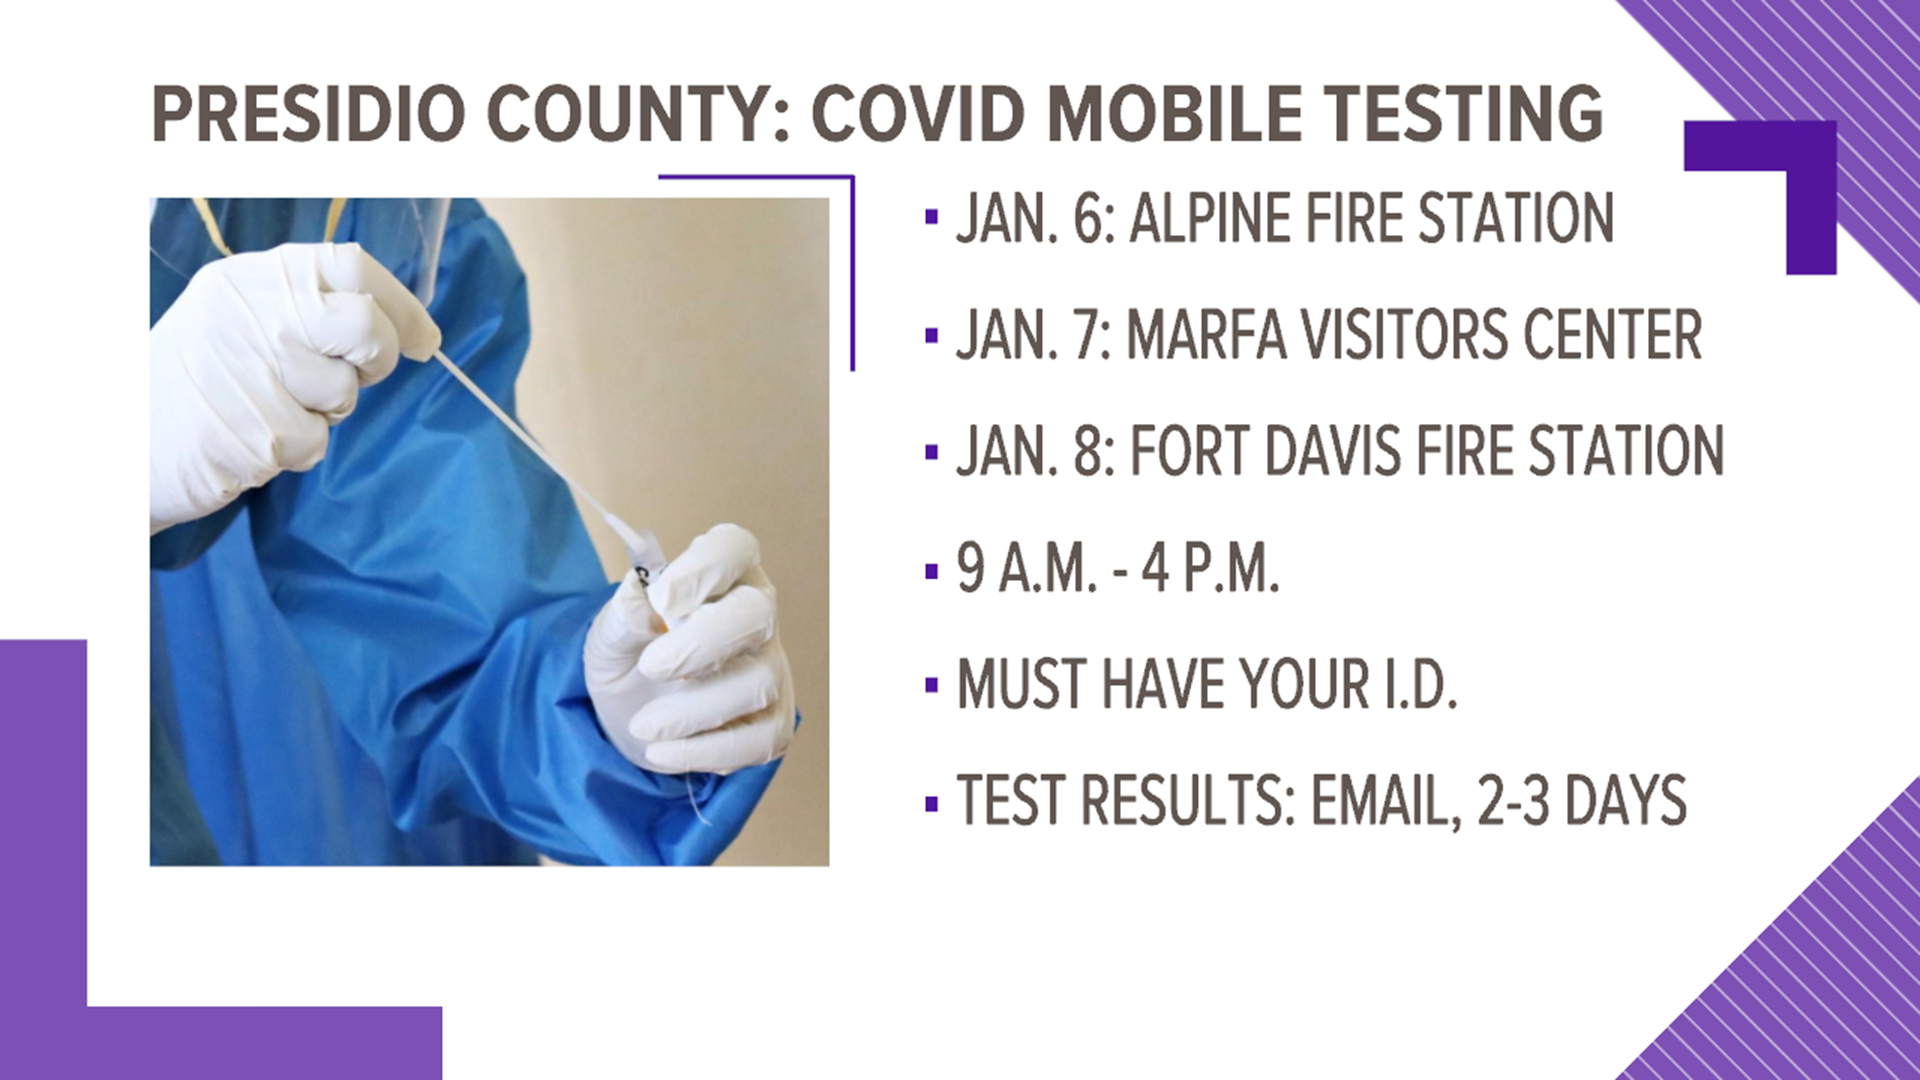 They will have testing at three separate locations on from Wednesday, January 6, through Friday, January 8.